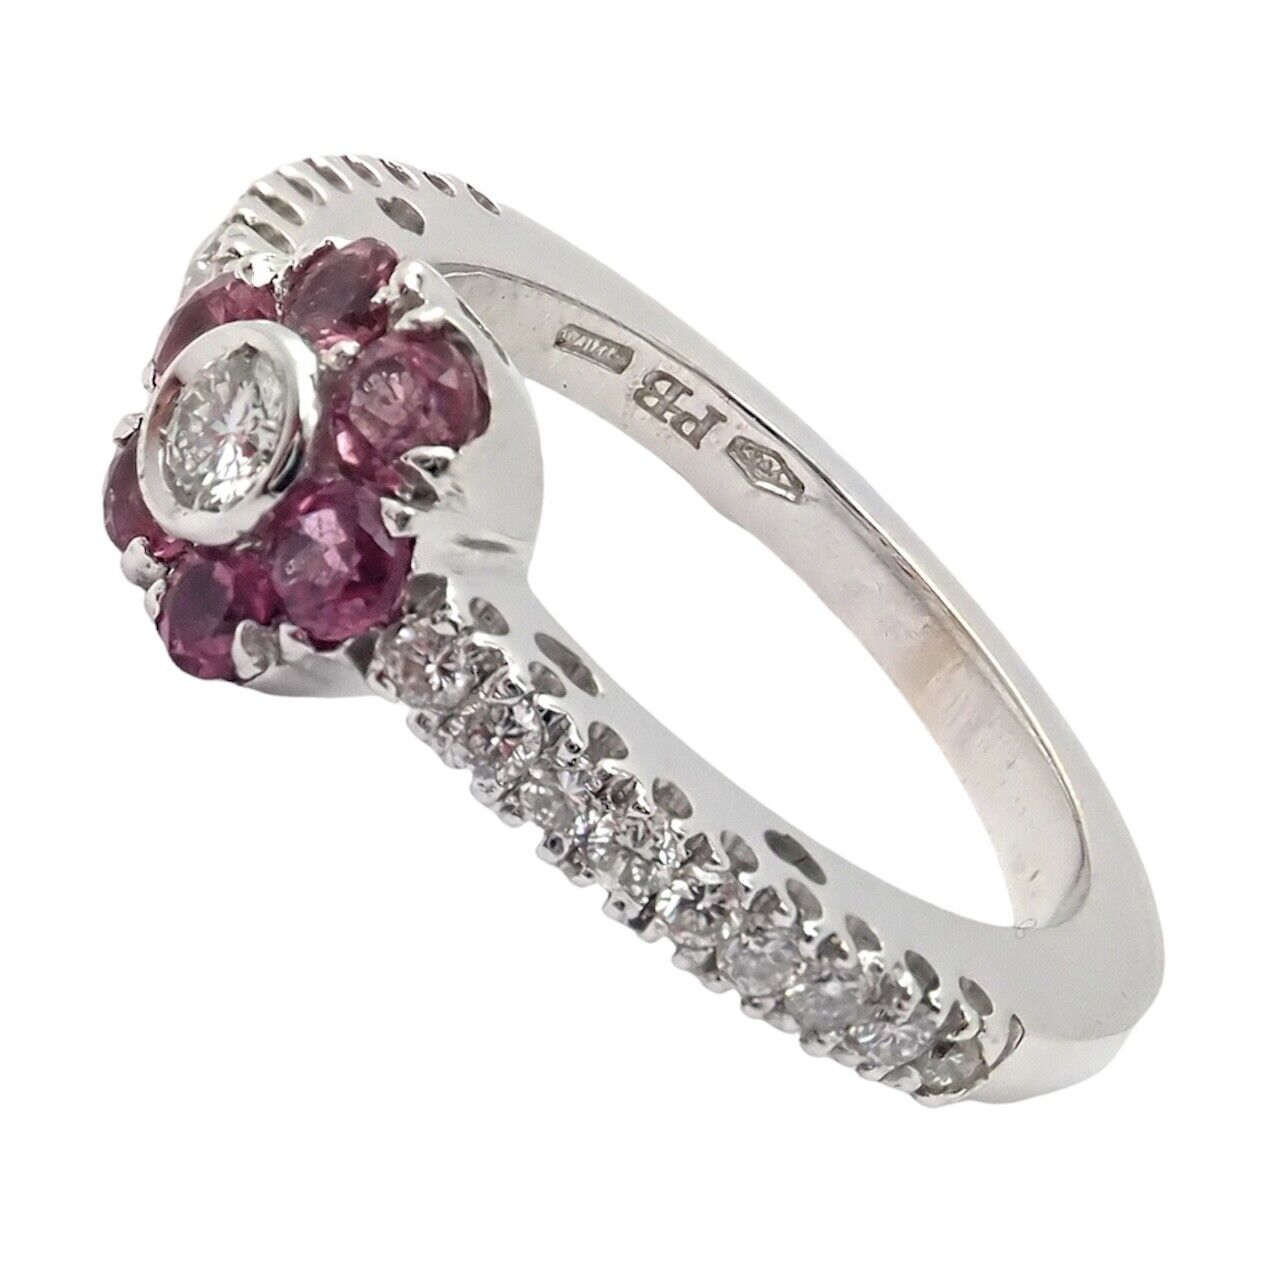 PASQUALE BRUNI Jewelry & Watches:Fine Jewelry:Rings Authentic! Pasquale Bruni 18k White Gold Diamond Pink Sapphire Flower Fiori Ring